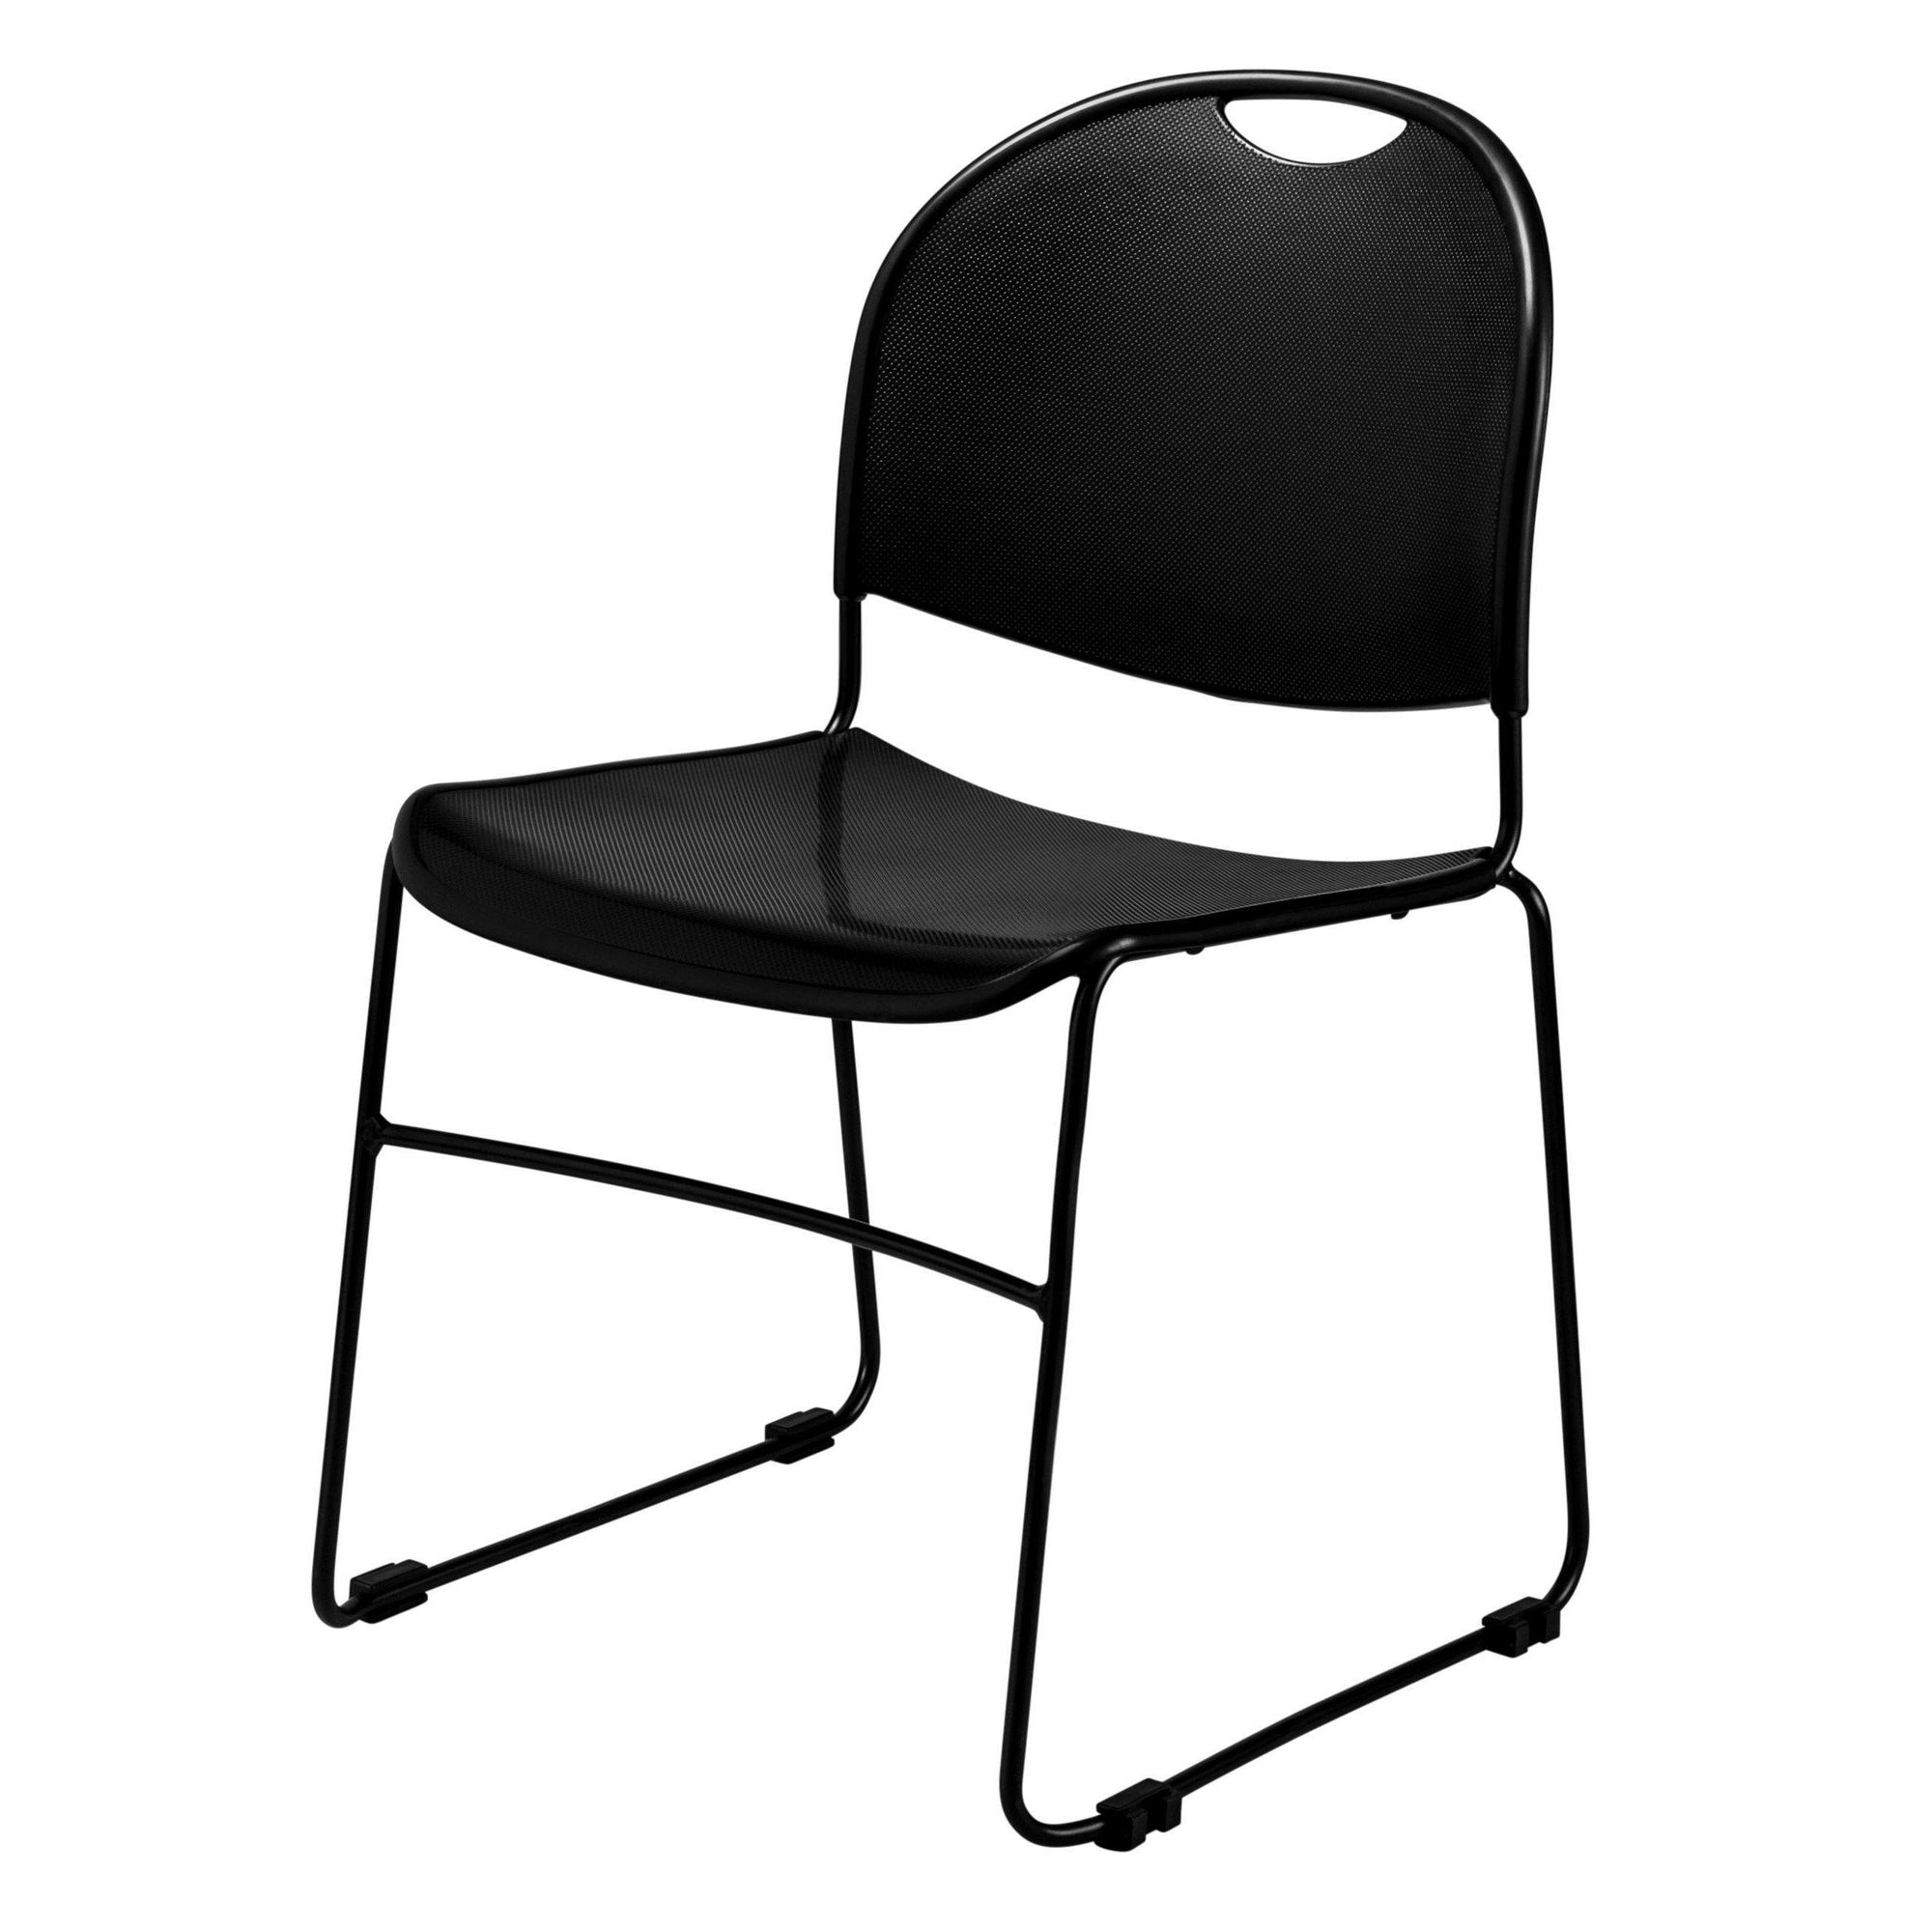 Commercialine Multi-purpose Ultra Compact Stack Chair-Chairs-Black-